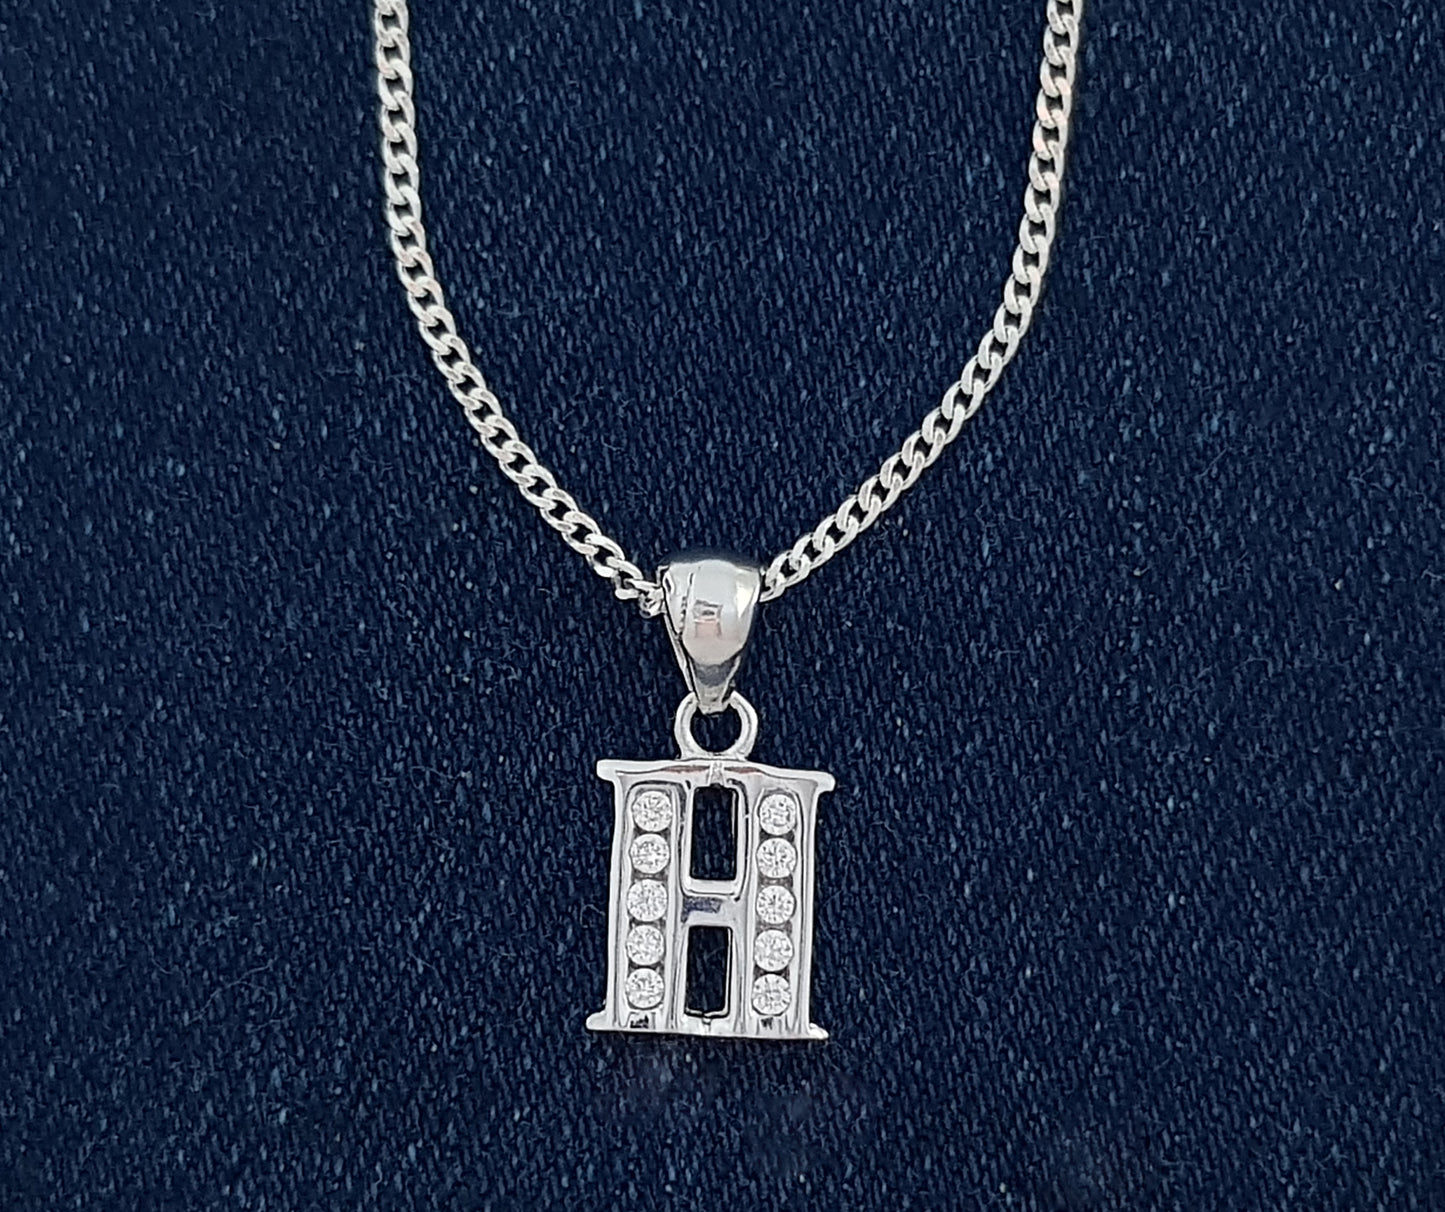 Sterling Silver Initial with Cubic Zirconia Stones- "H" Initial or Letter